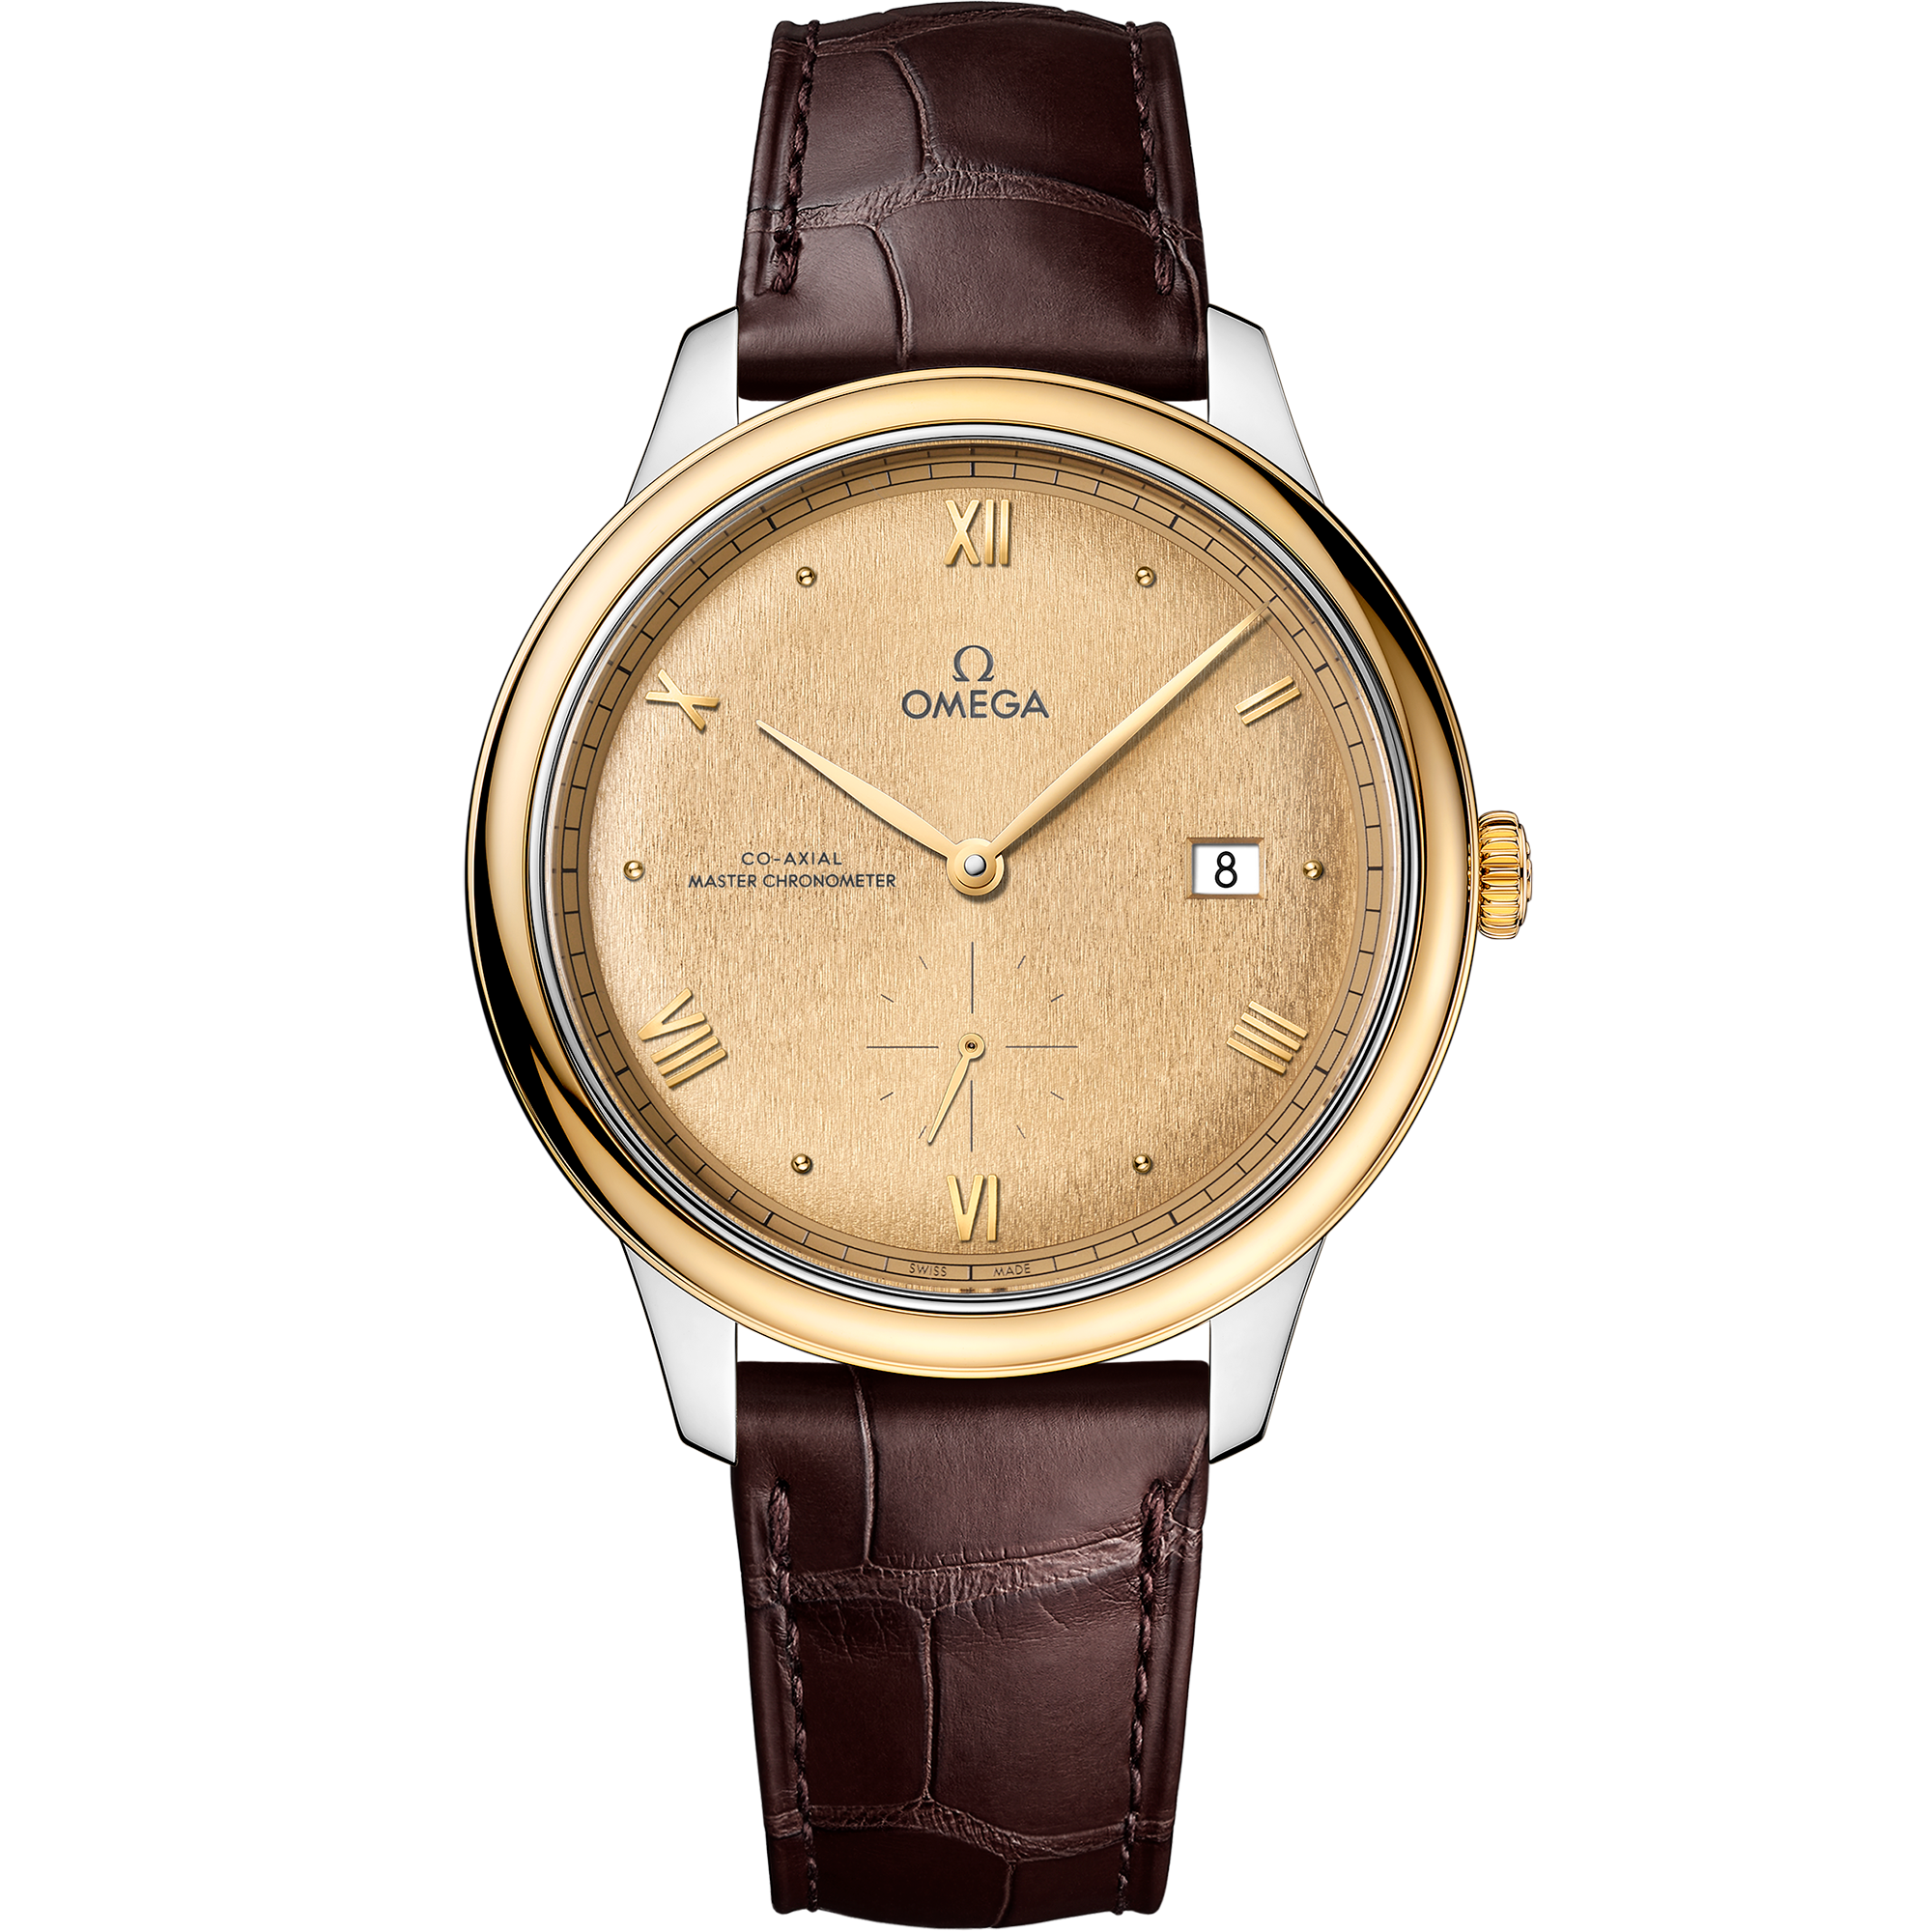 De Ville 41 mm, steel - yellow gold on leather strap - 434.23.41.20.08.001